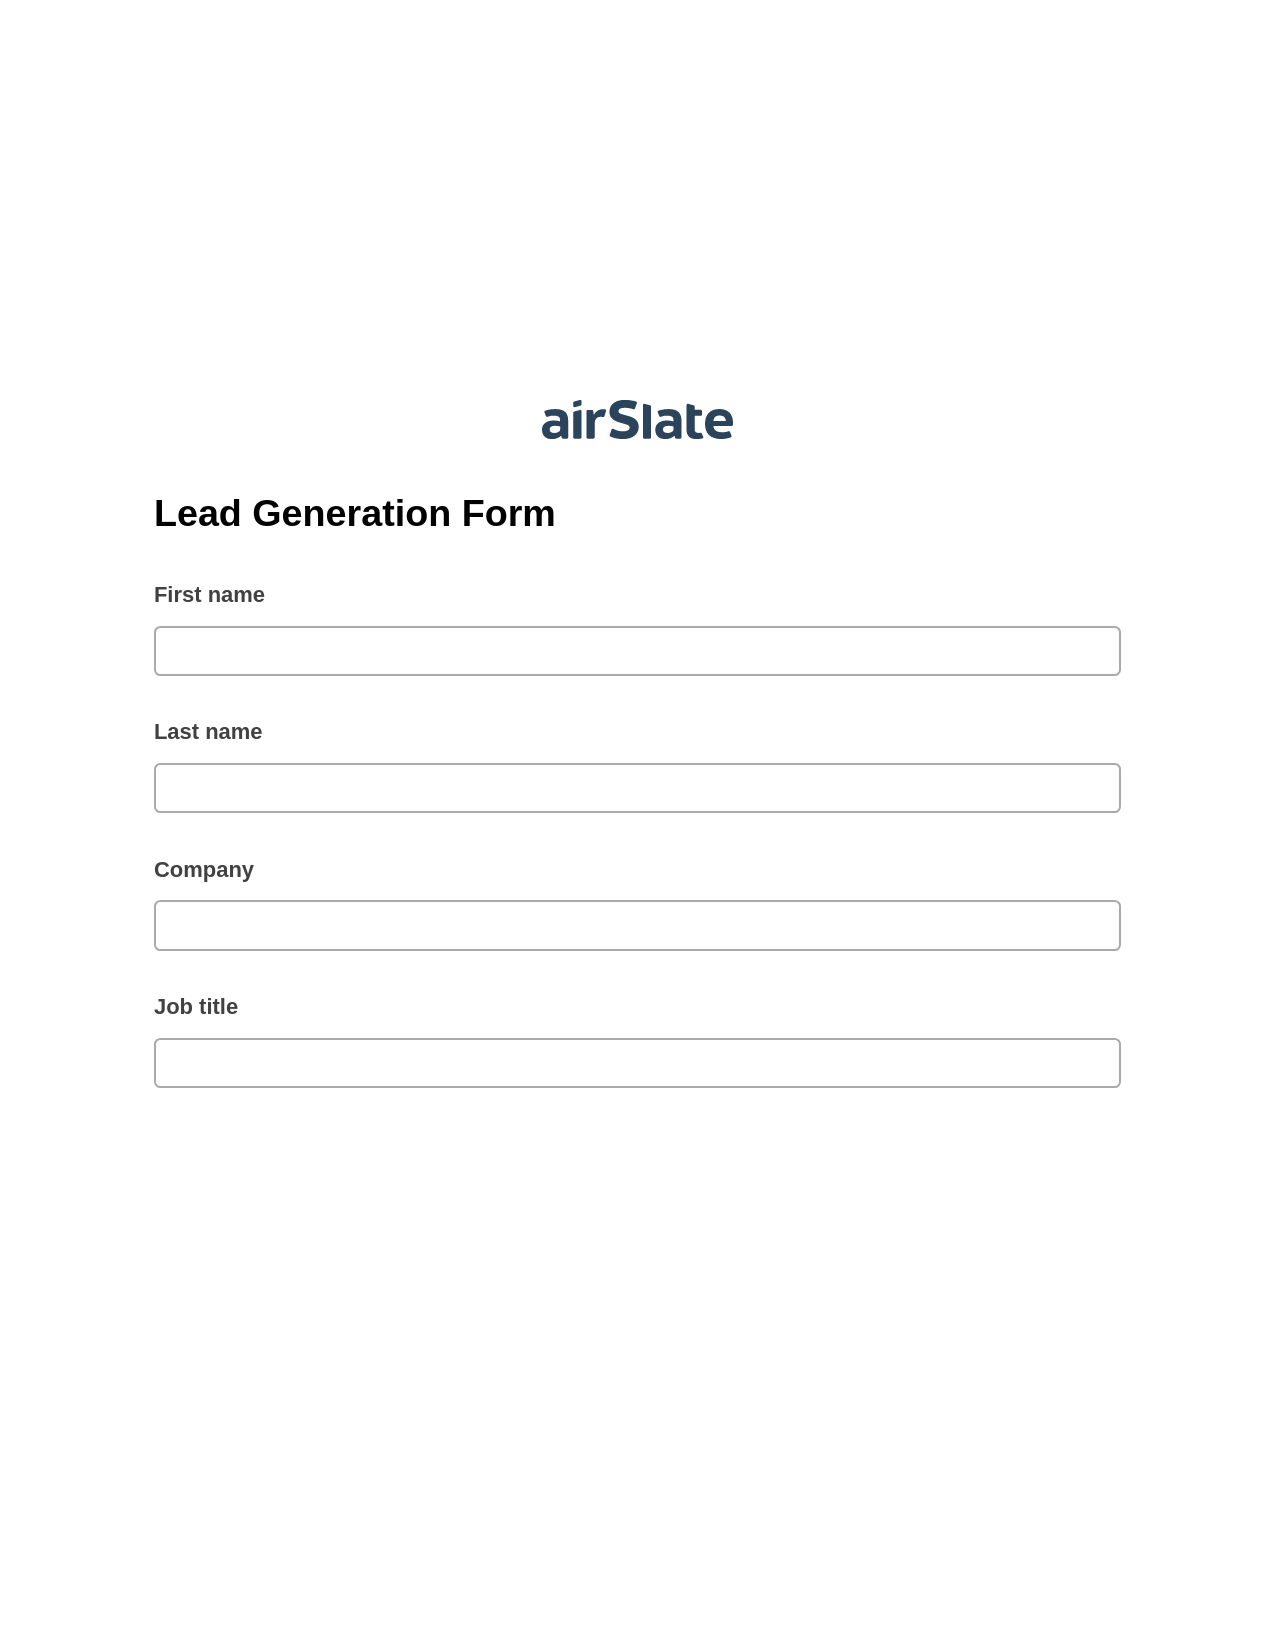 Lead Generation Form Pre-fill from CSV File Bot, Slack Notification Bot, Email Notification Postfinish Bot